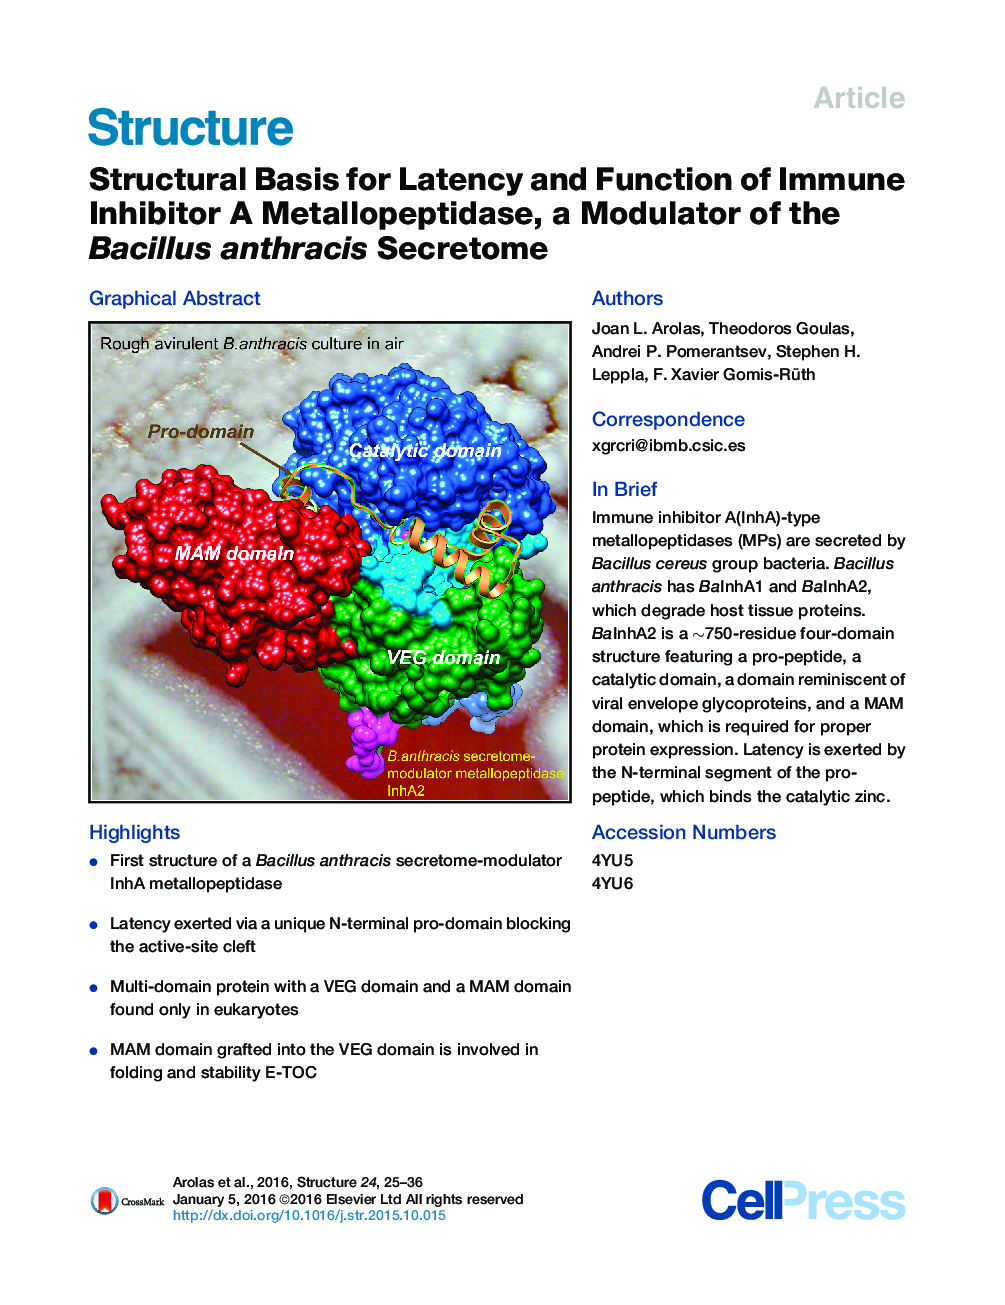 Structural Basis for Latency and Function of Immune Inhibitor A Metallopeptidase, a Modulator of the Bacillus anthracis Secretome